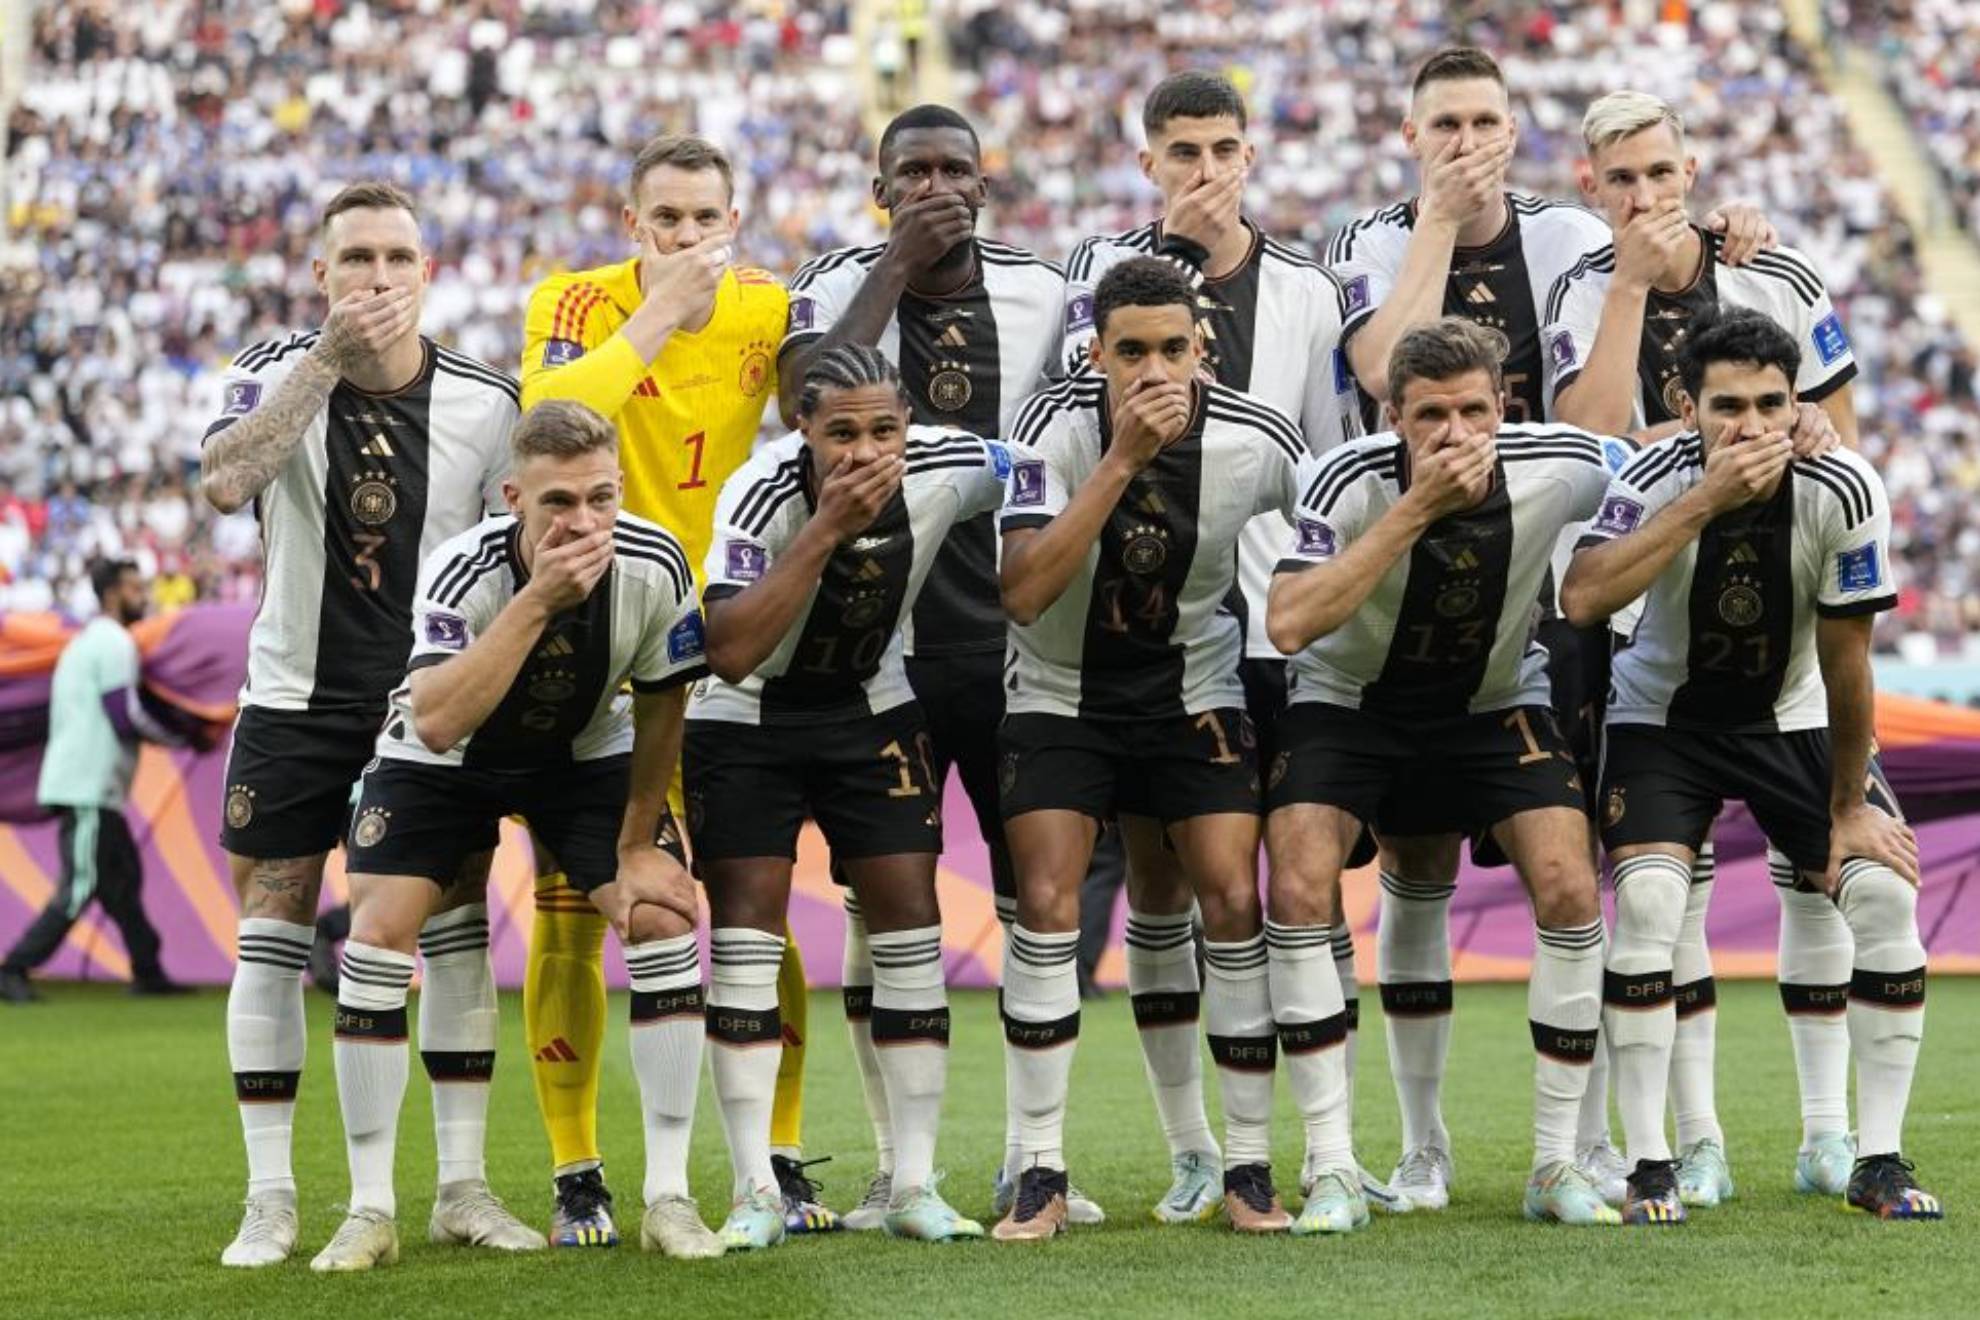 The German national team's controversial protest